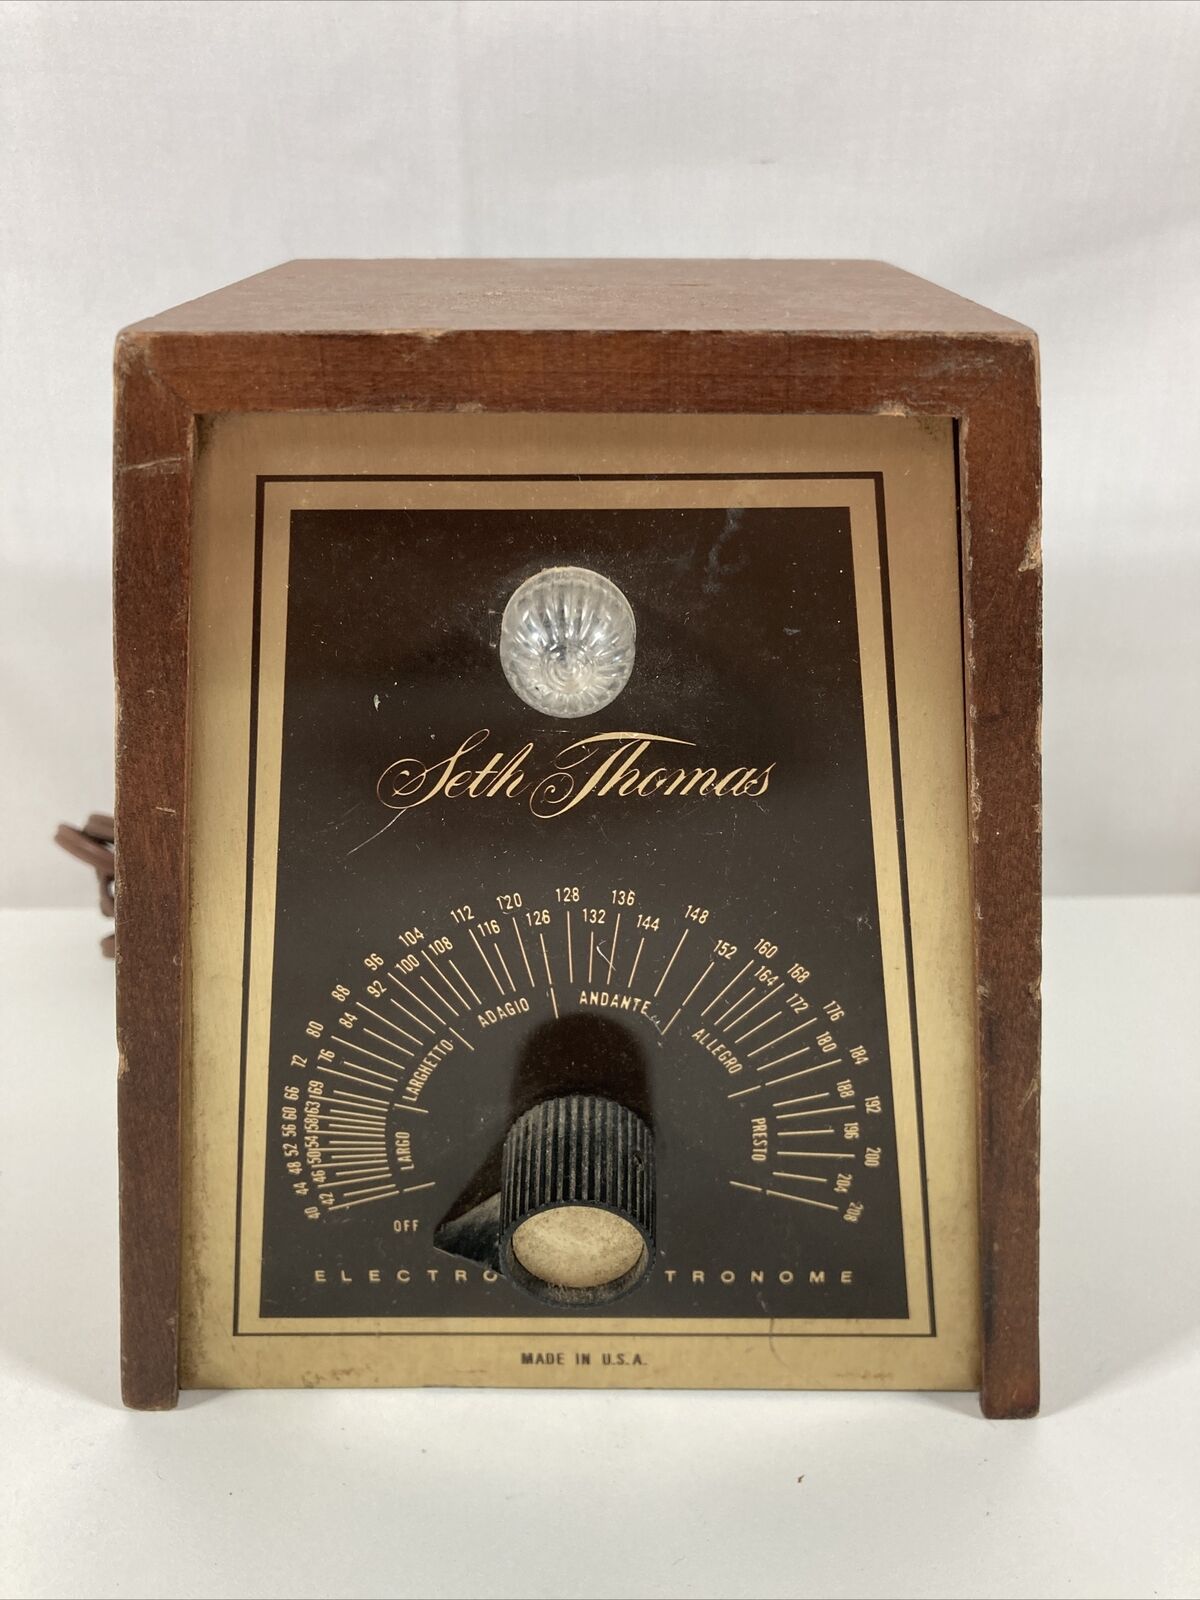 Vintage Seth Thomas Electronic Metronome Model 1106-000 - Tested And Working!